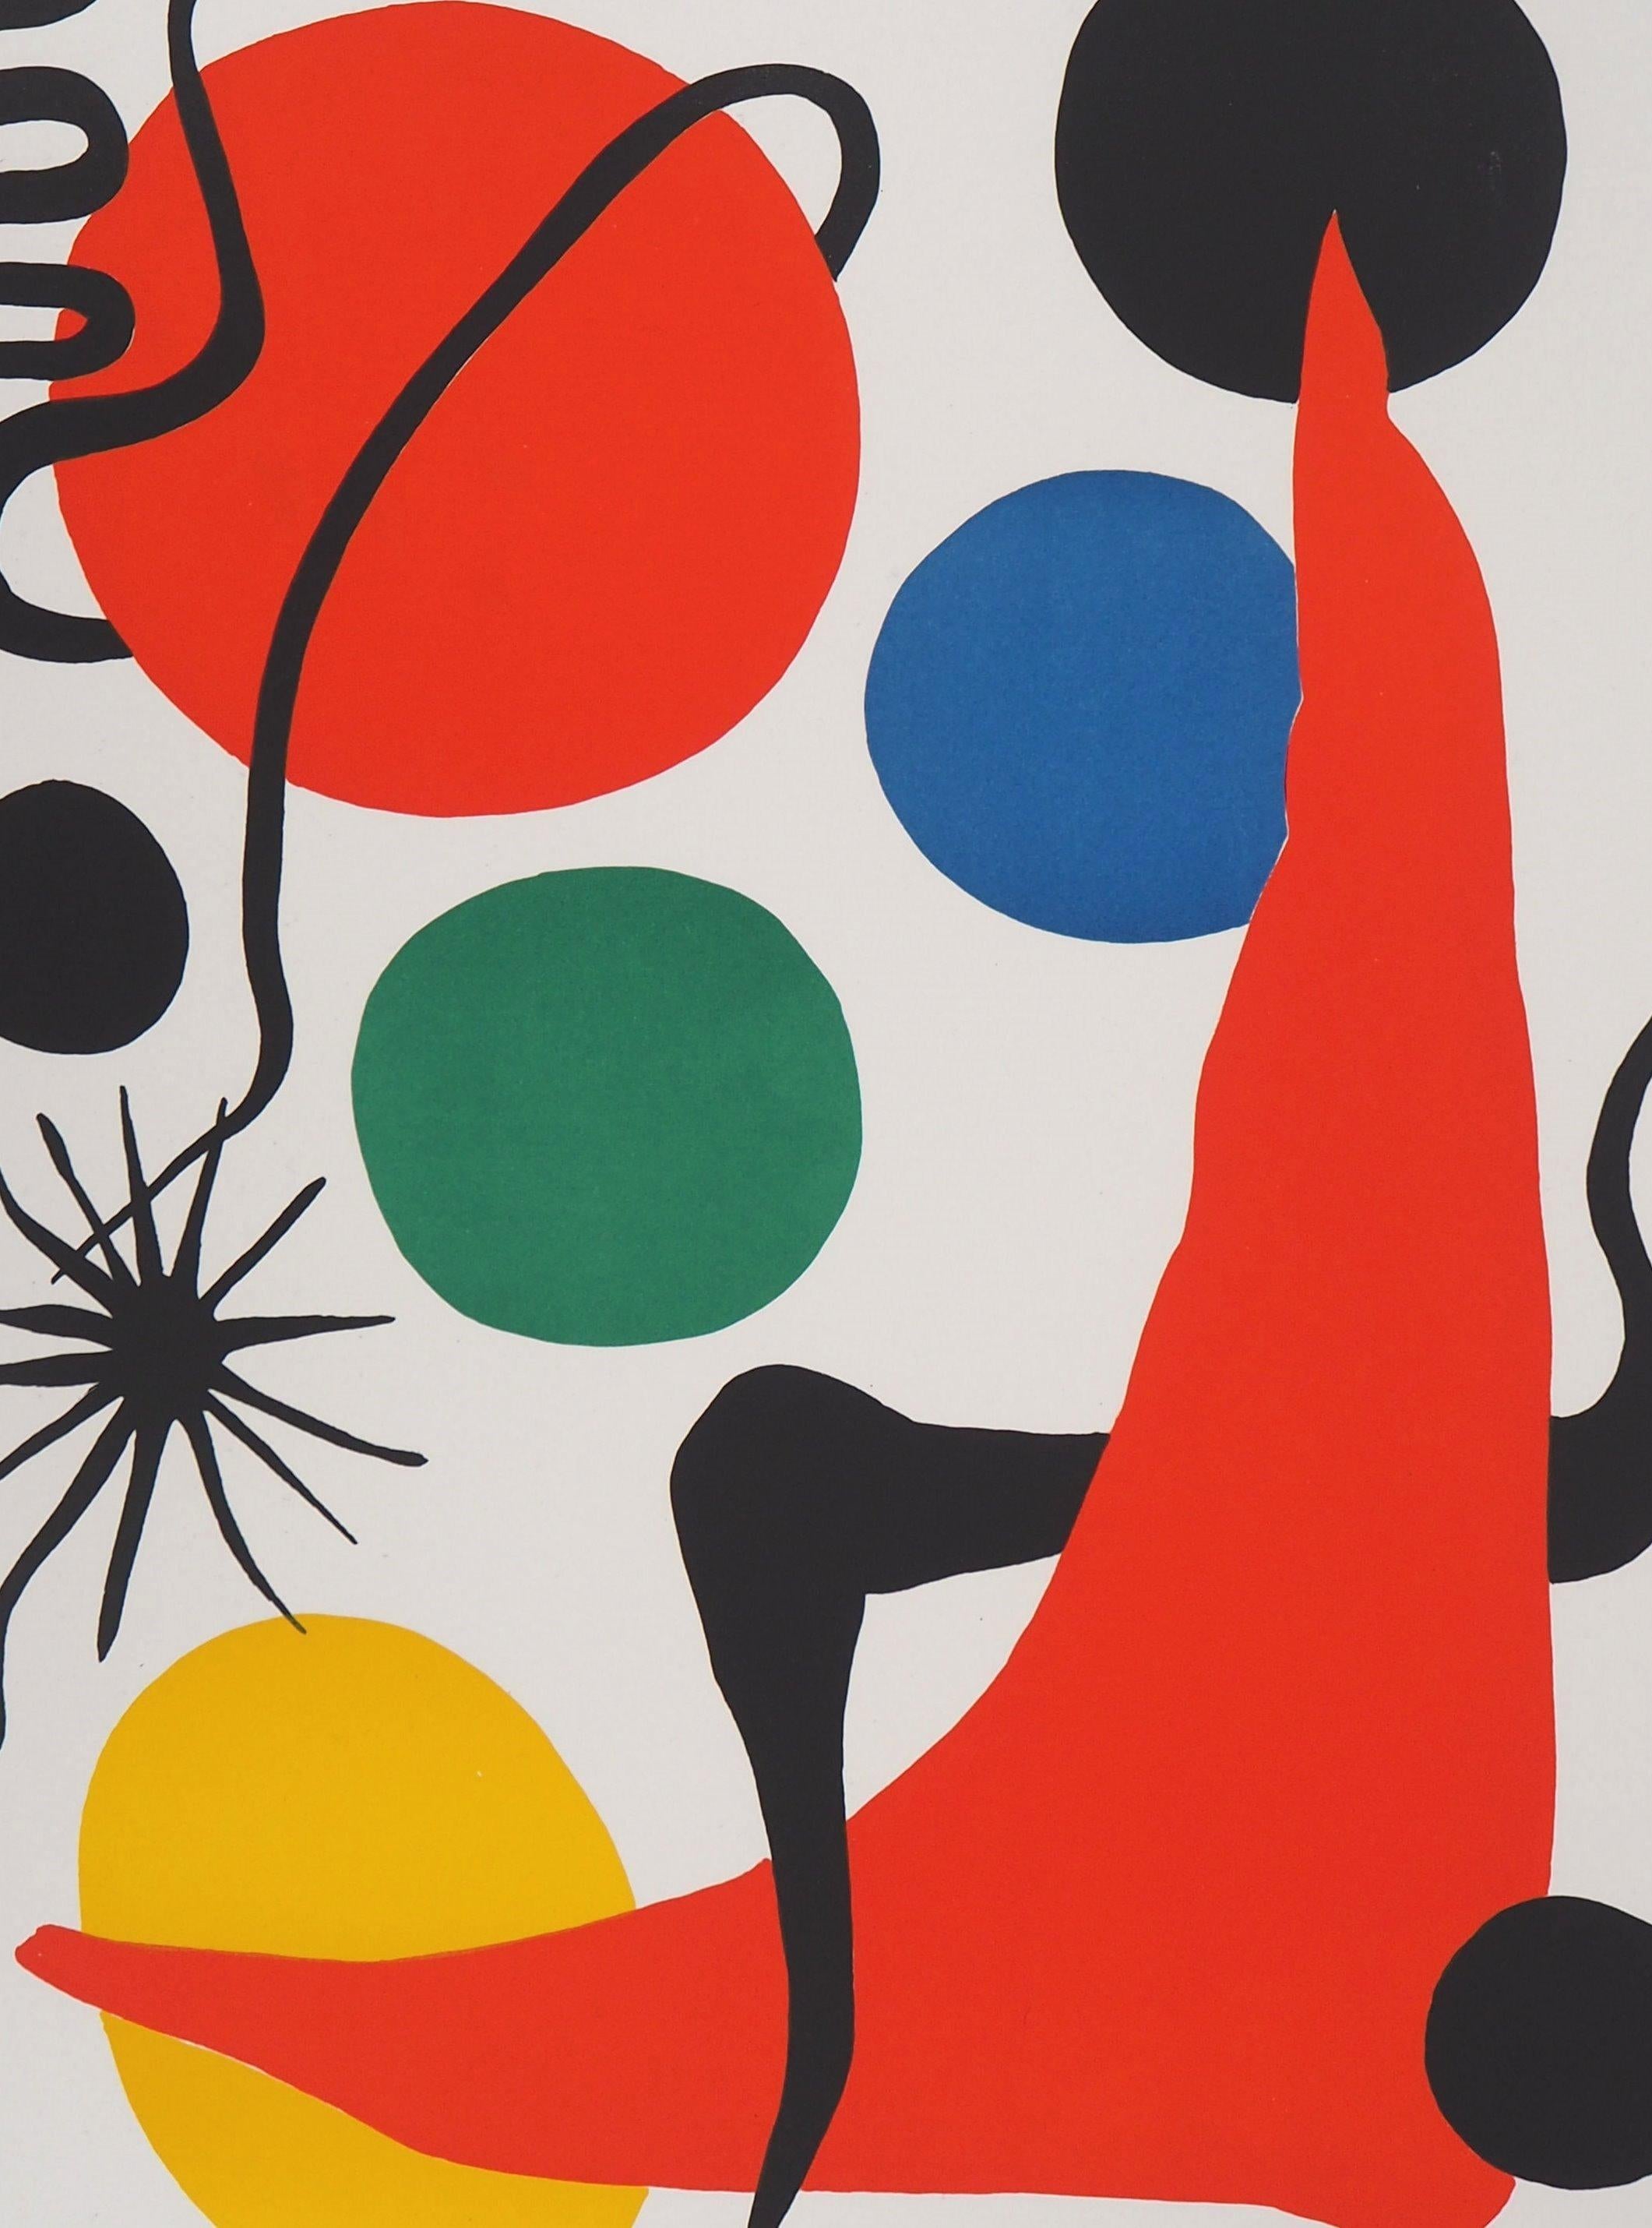 Circles and triangle - Original signed lithograph - Abstract Print by Alexander Calder